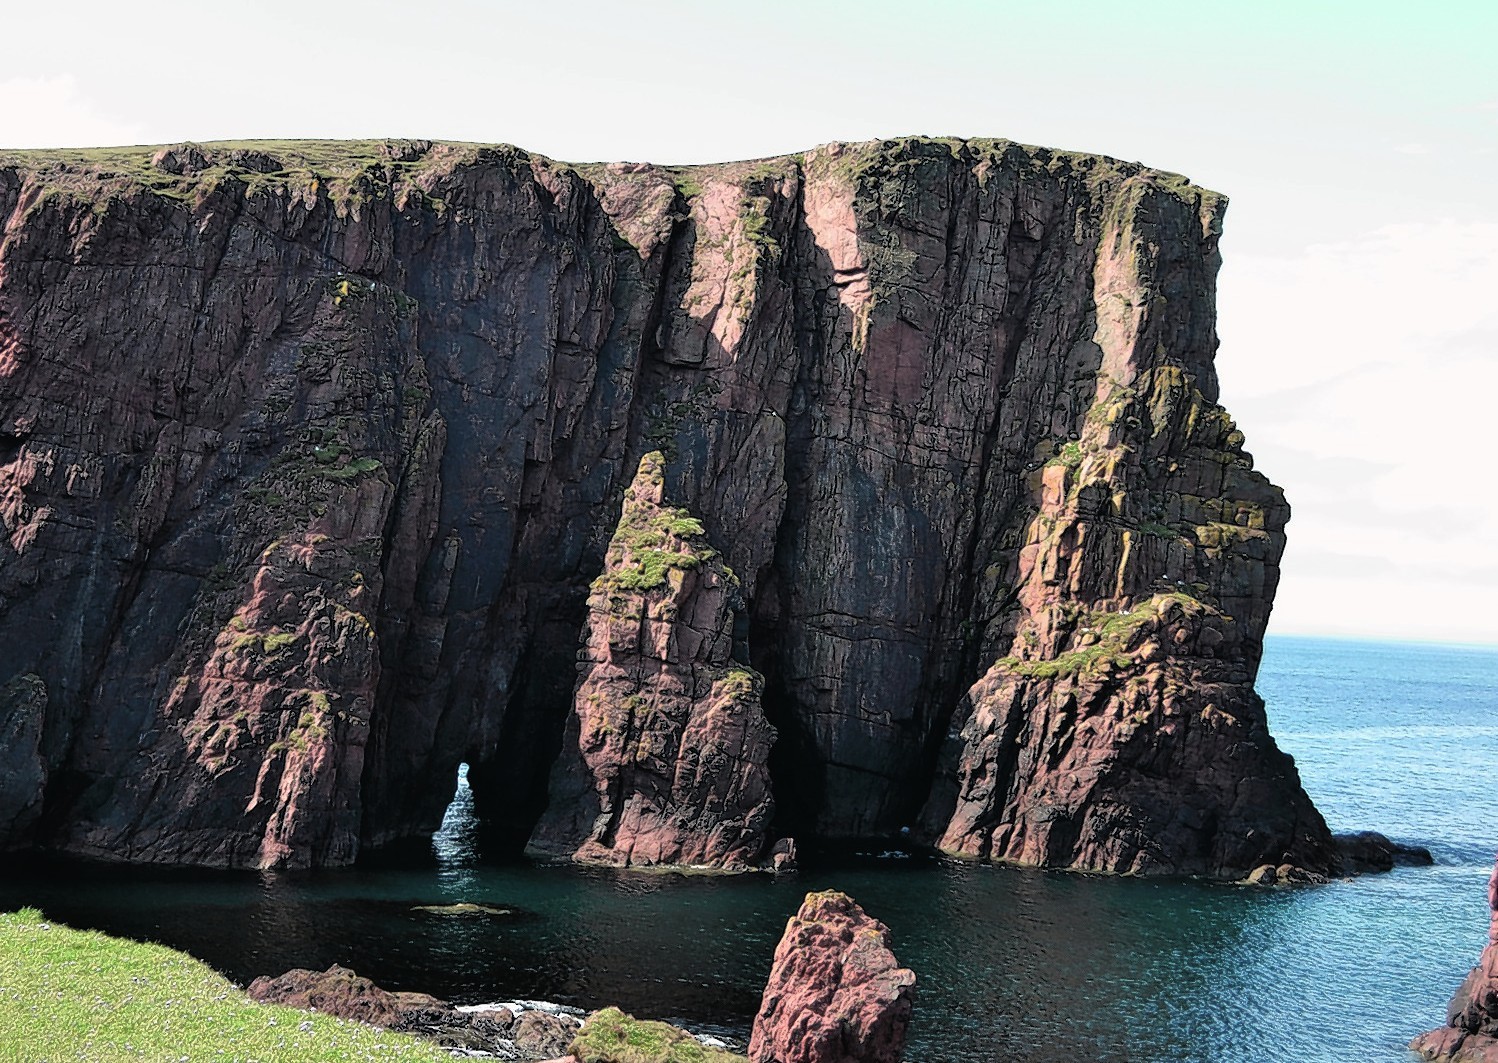 There are fears over clifftop safety in Shetland